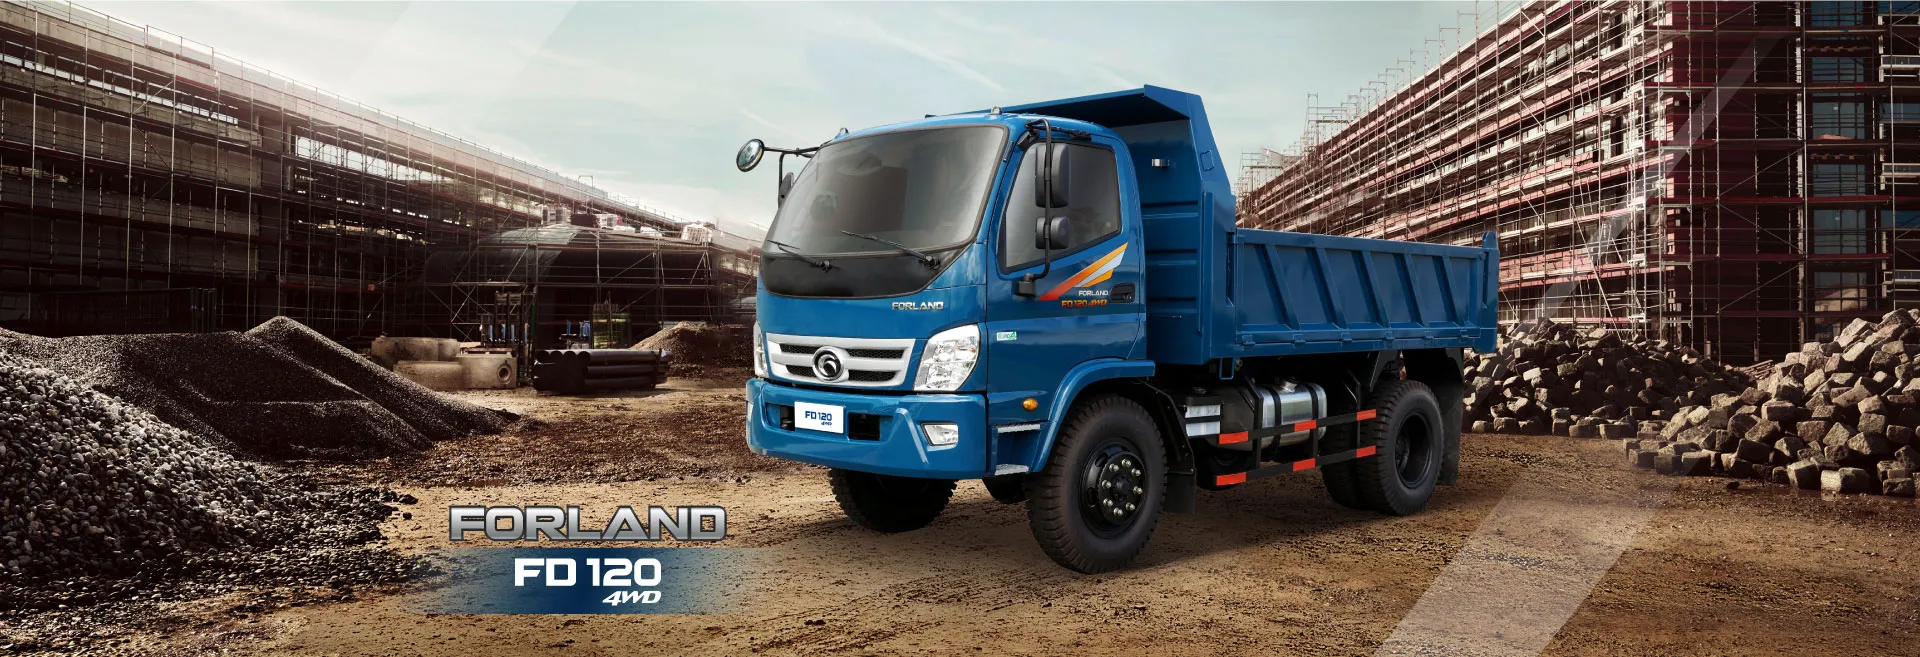 Forland FD120 - 4WD